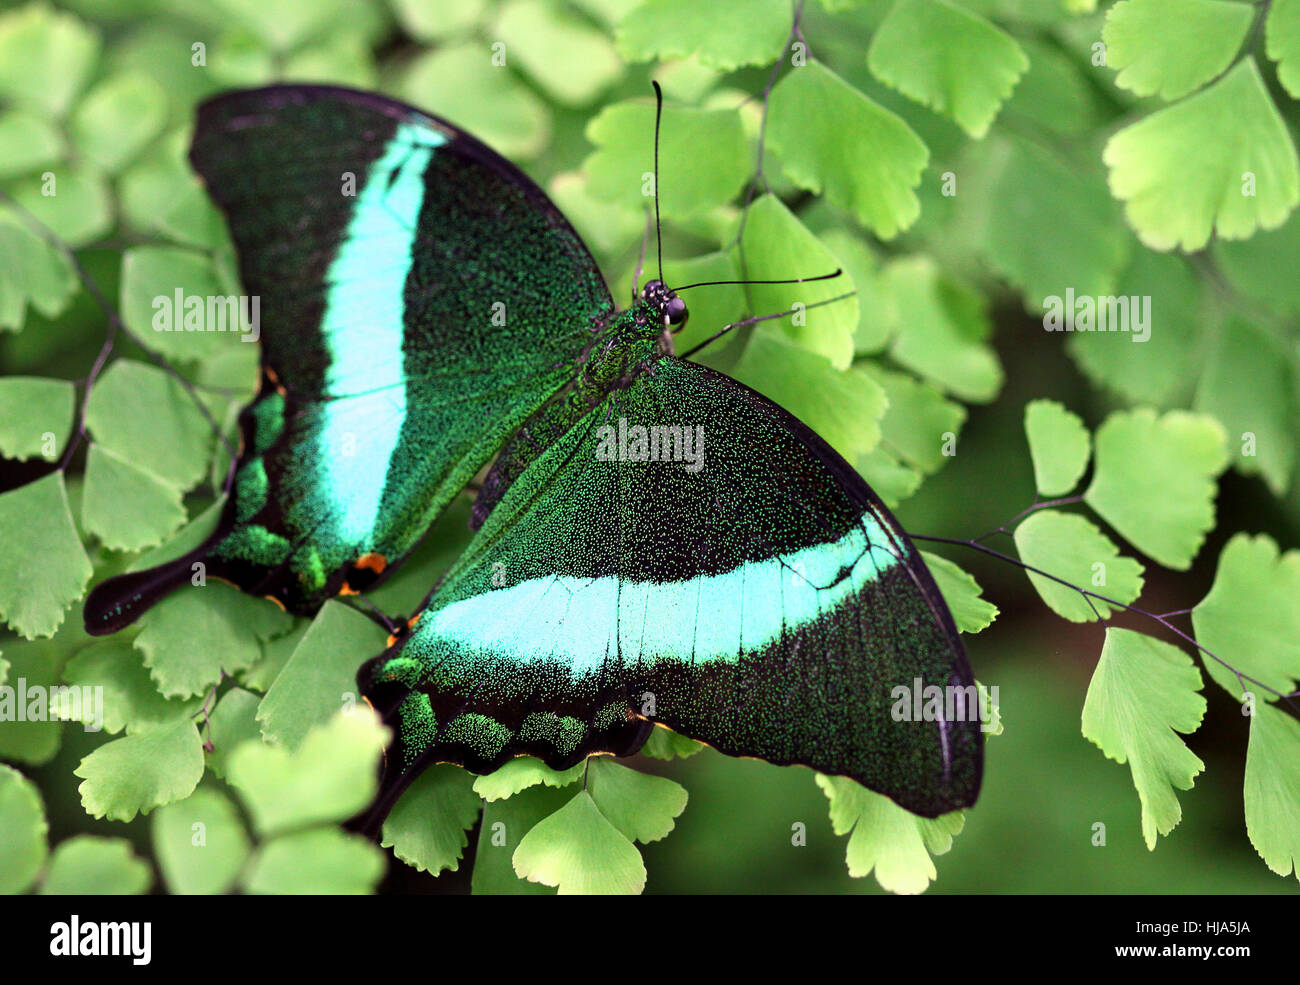 swallowtail, insect, green, fauna, asia, butterfly, striated, asiatic, exotic, Stock Photo